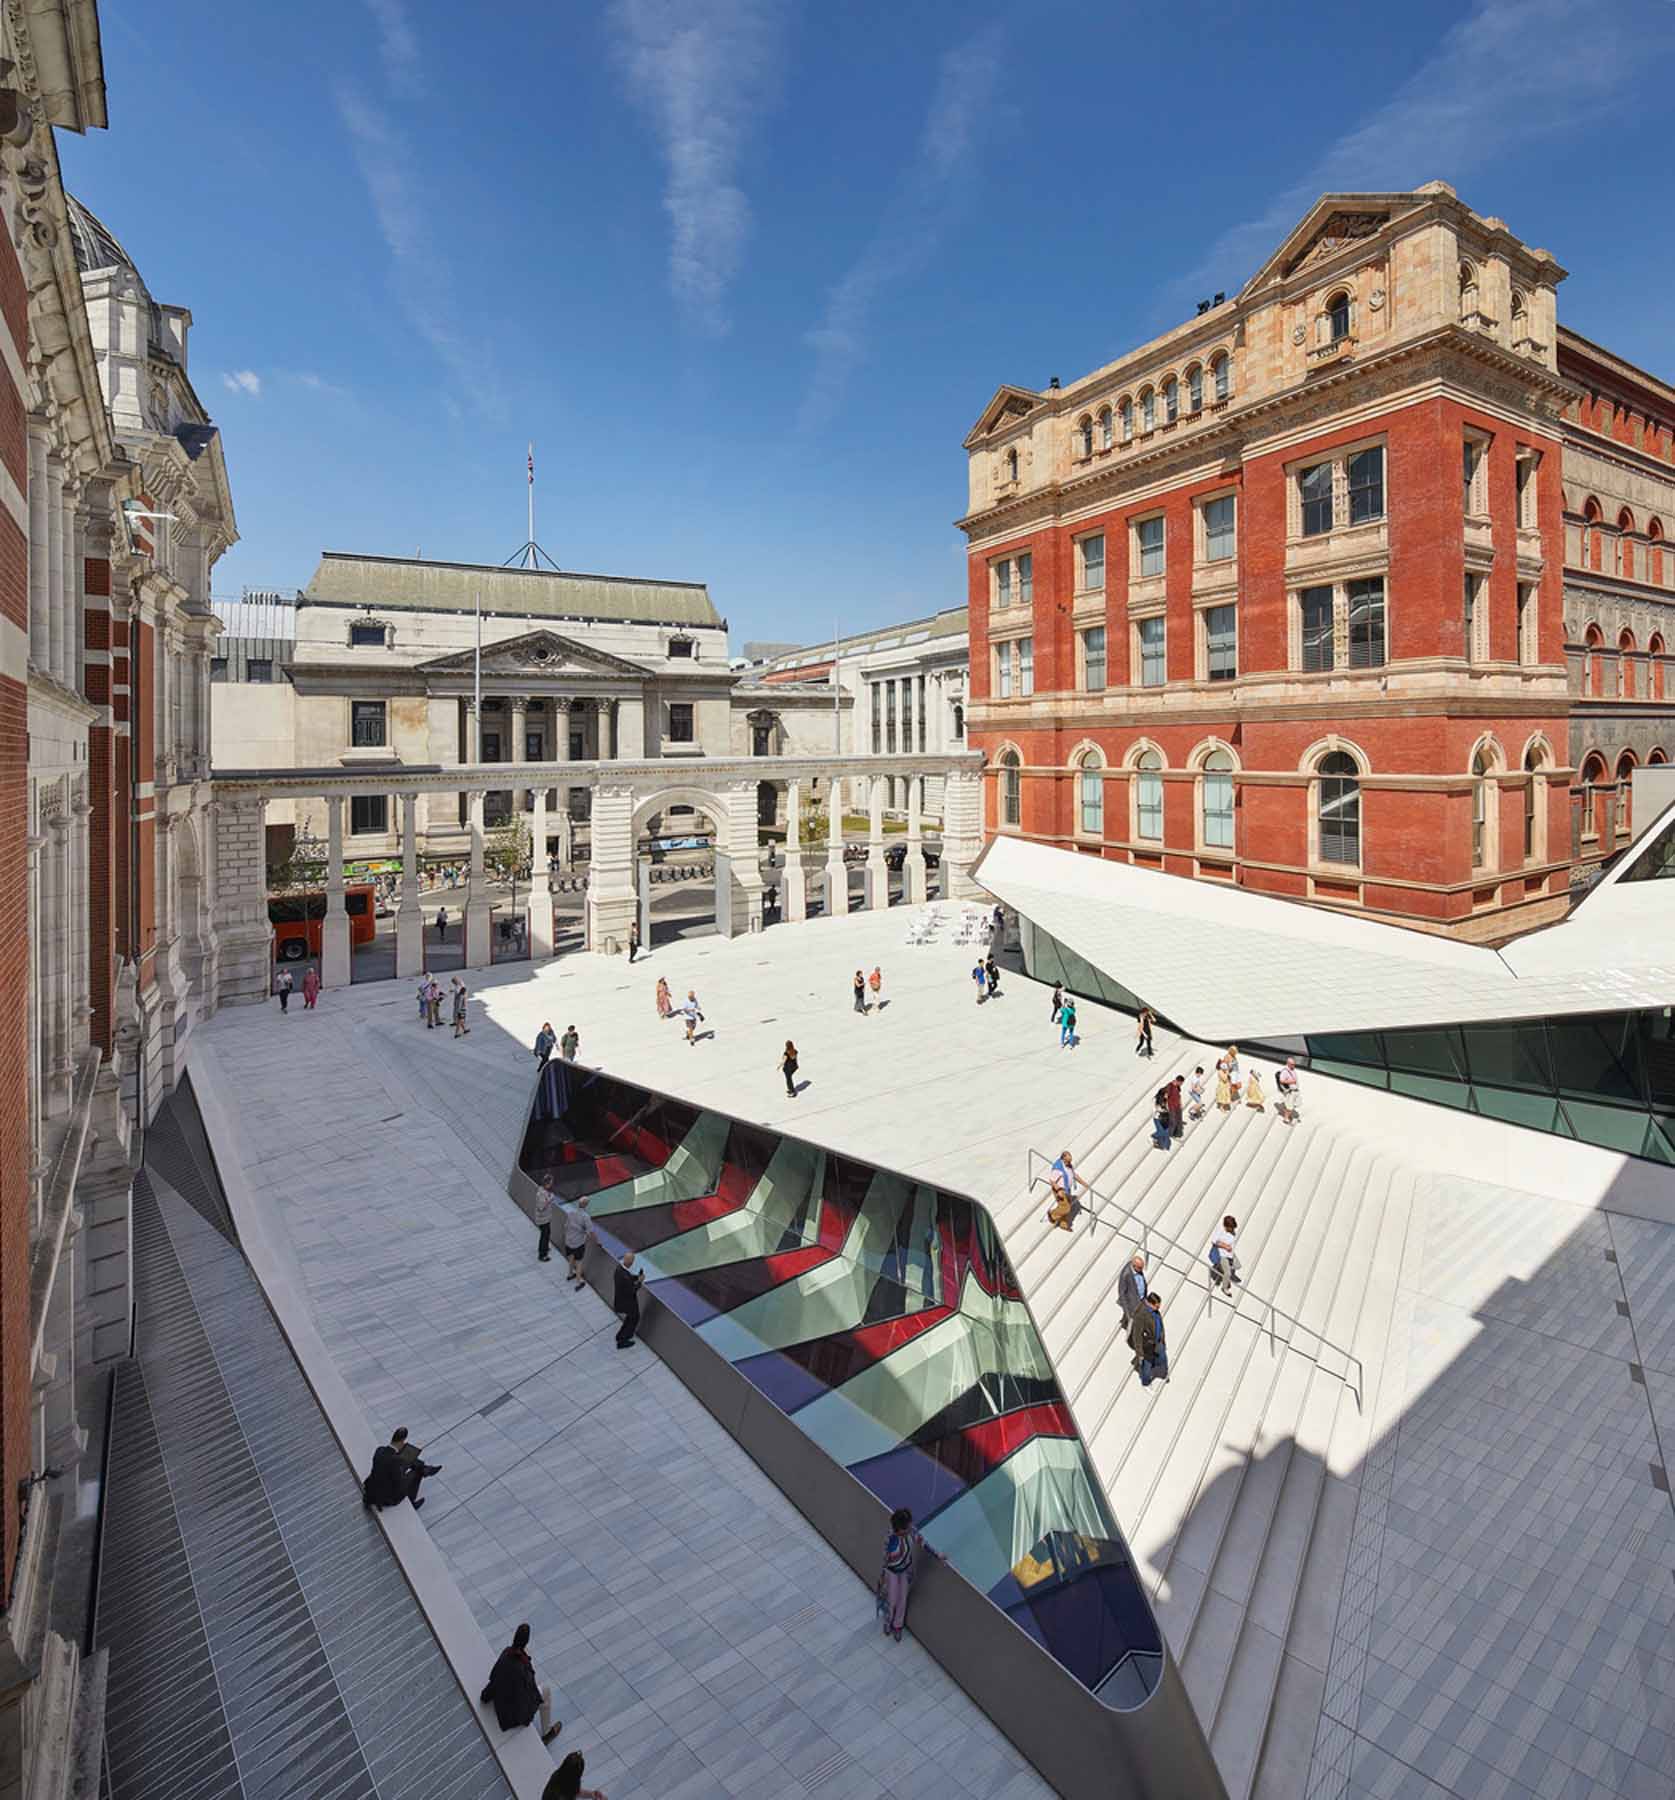 Exhibition Road Quarter: A New Entrance, Courtyard & Underground Gallery For The V&A, London By Amanda Levete Architects (AL_A), 2017